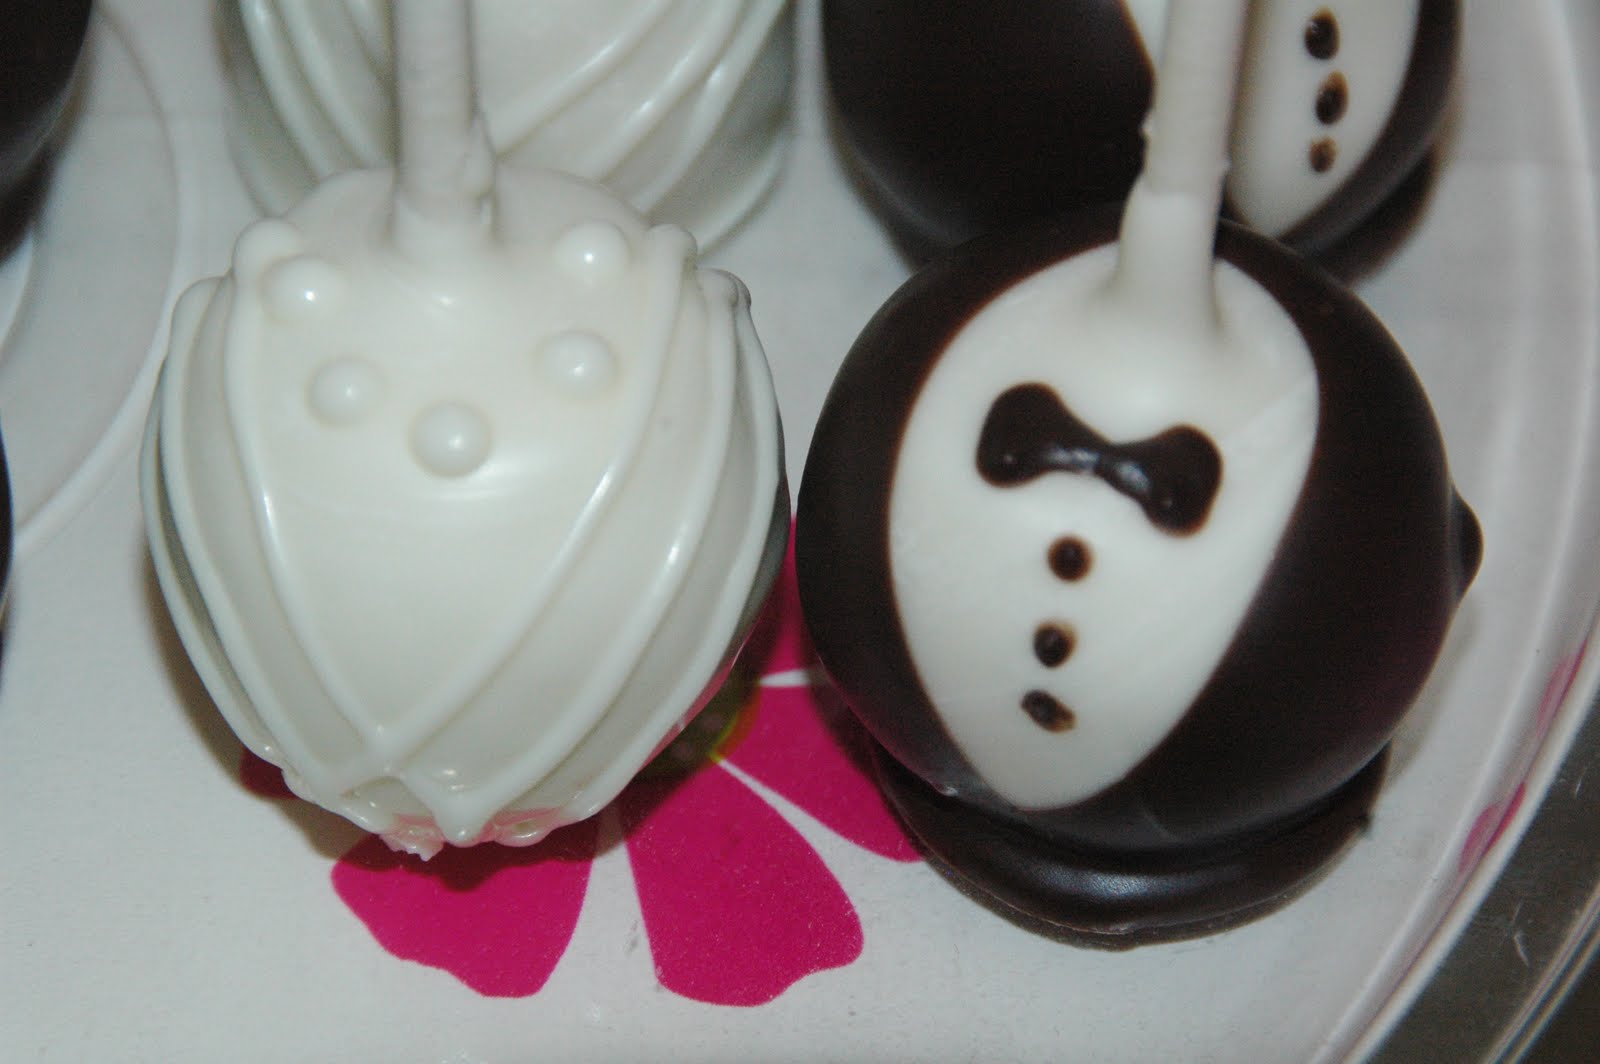 wedding cake pops images Posted by Kimberlee Peers-Moore at 2:23 PM